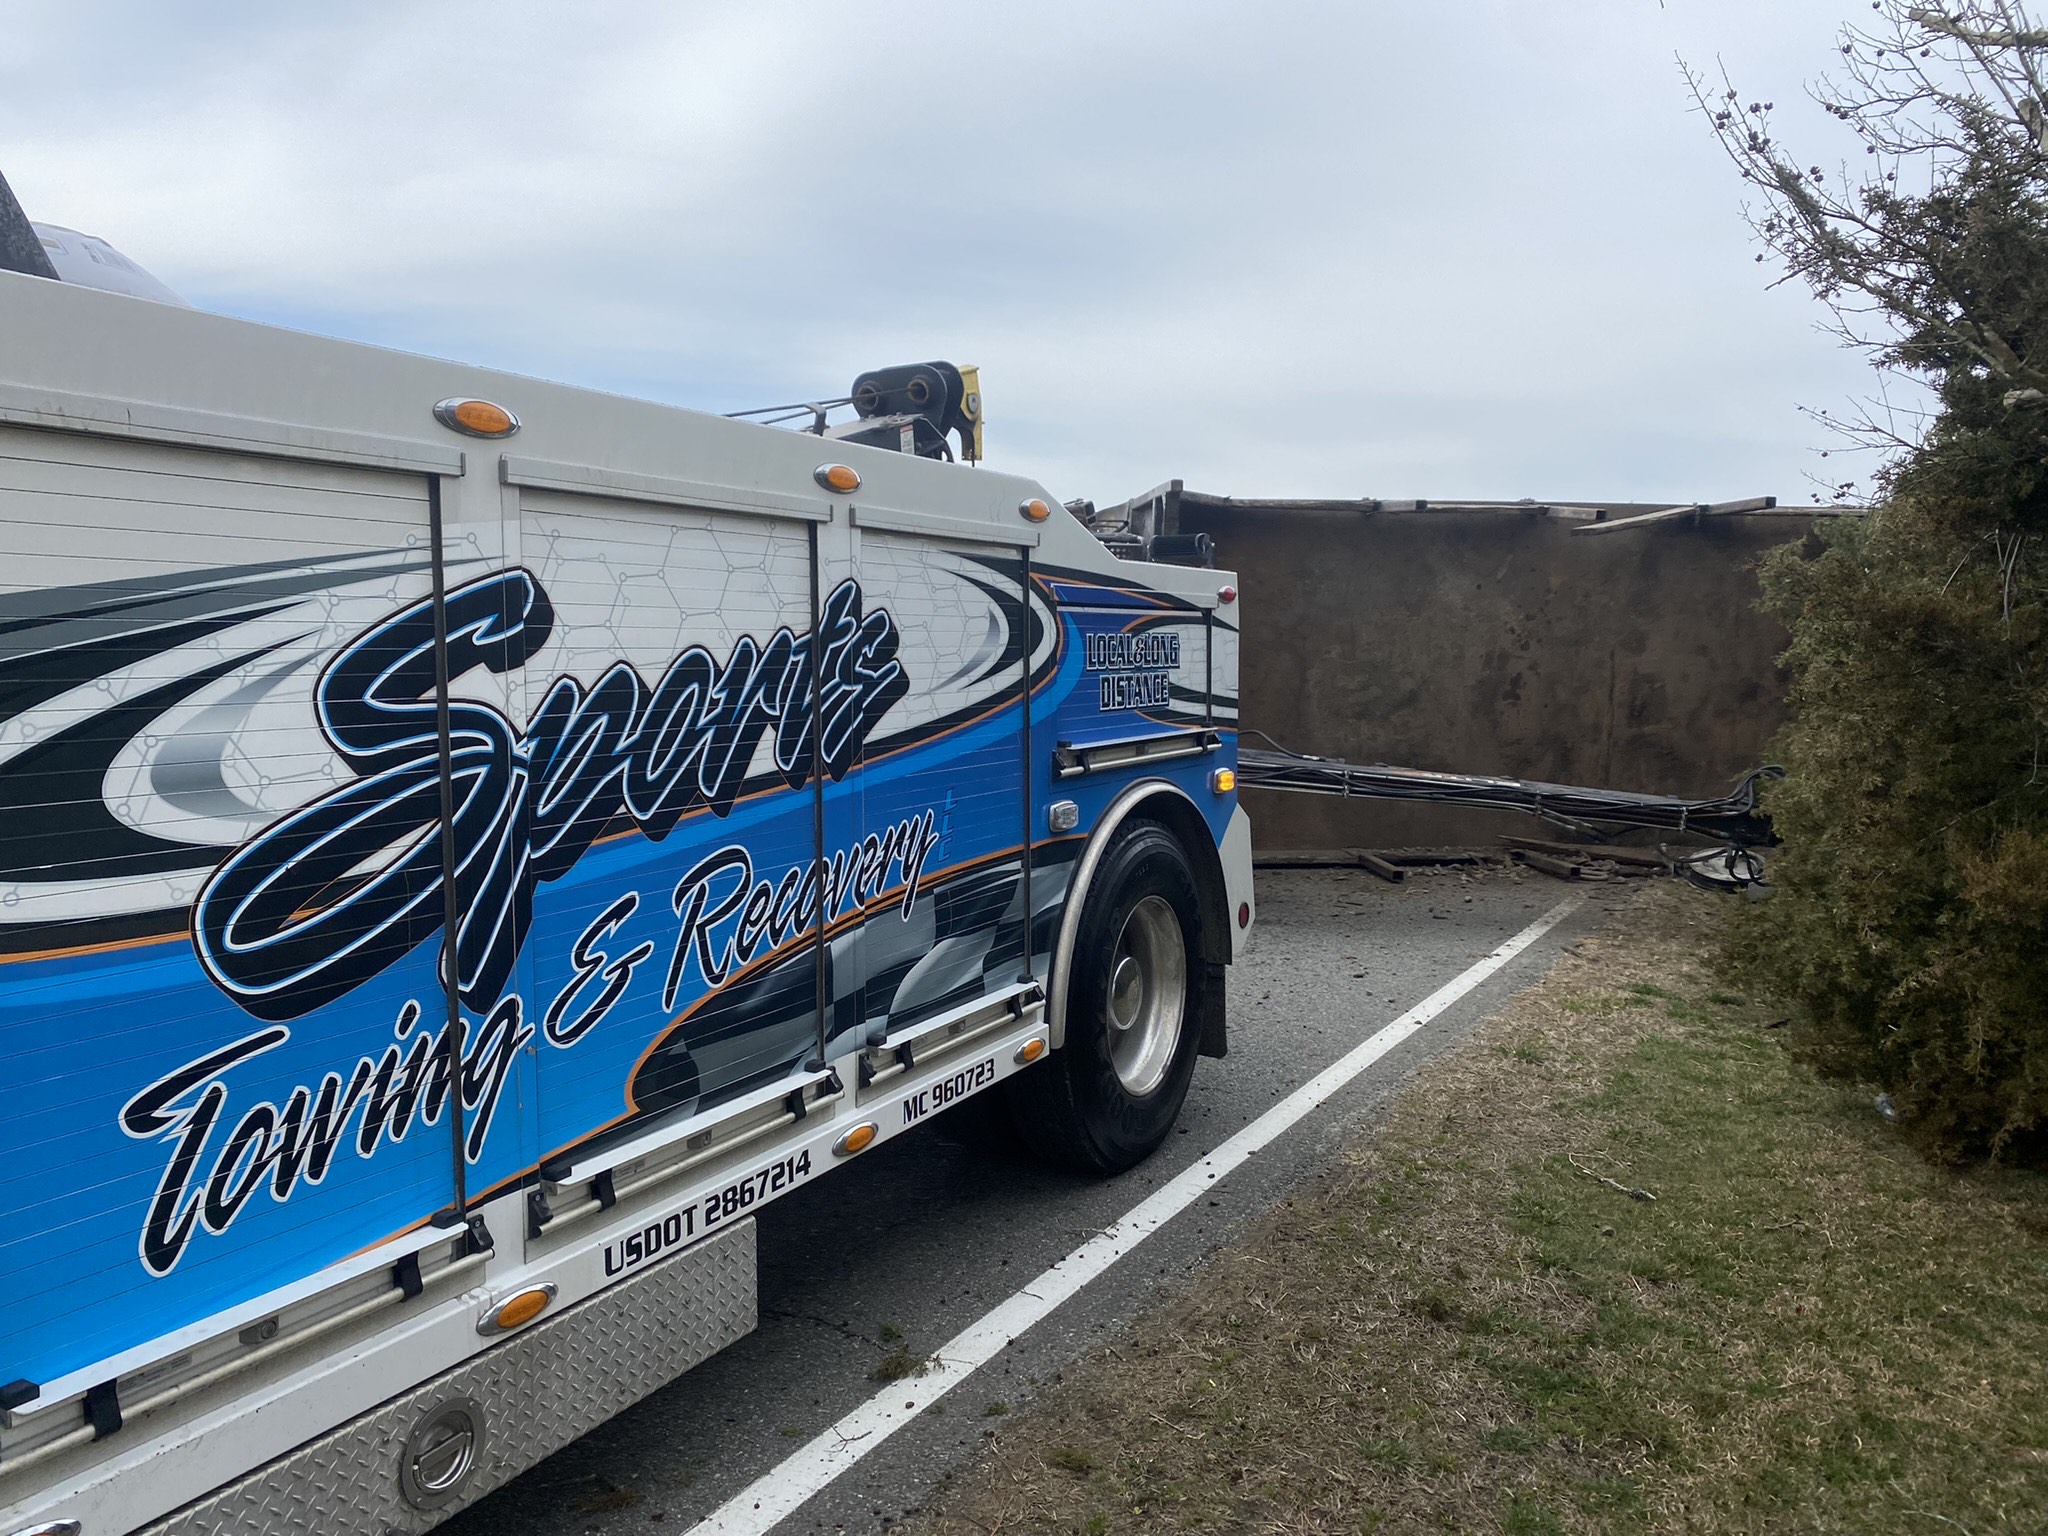 Sports Towing and Recovery hauling service